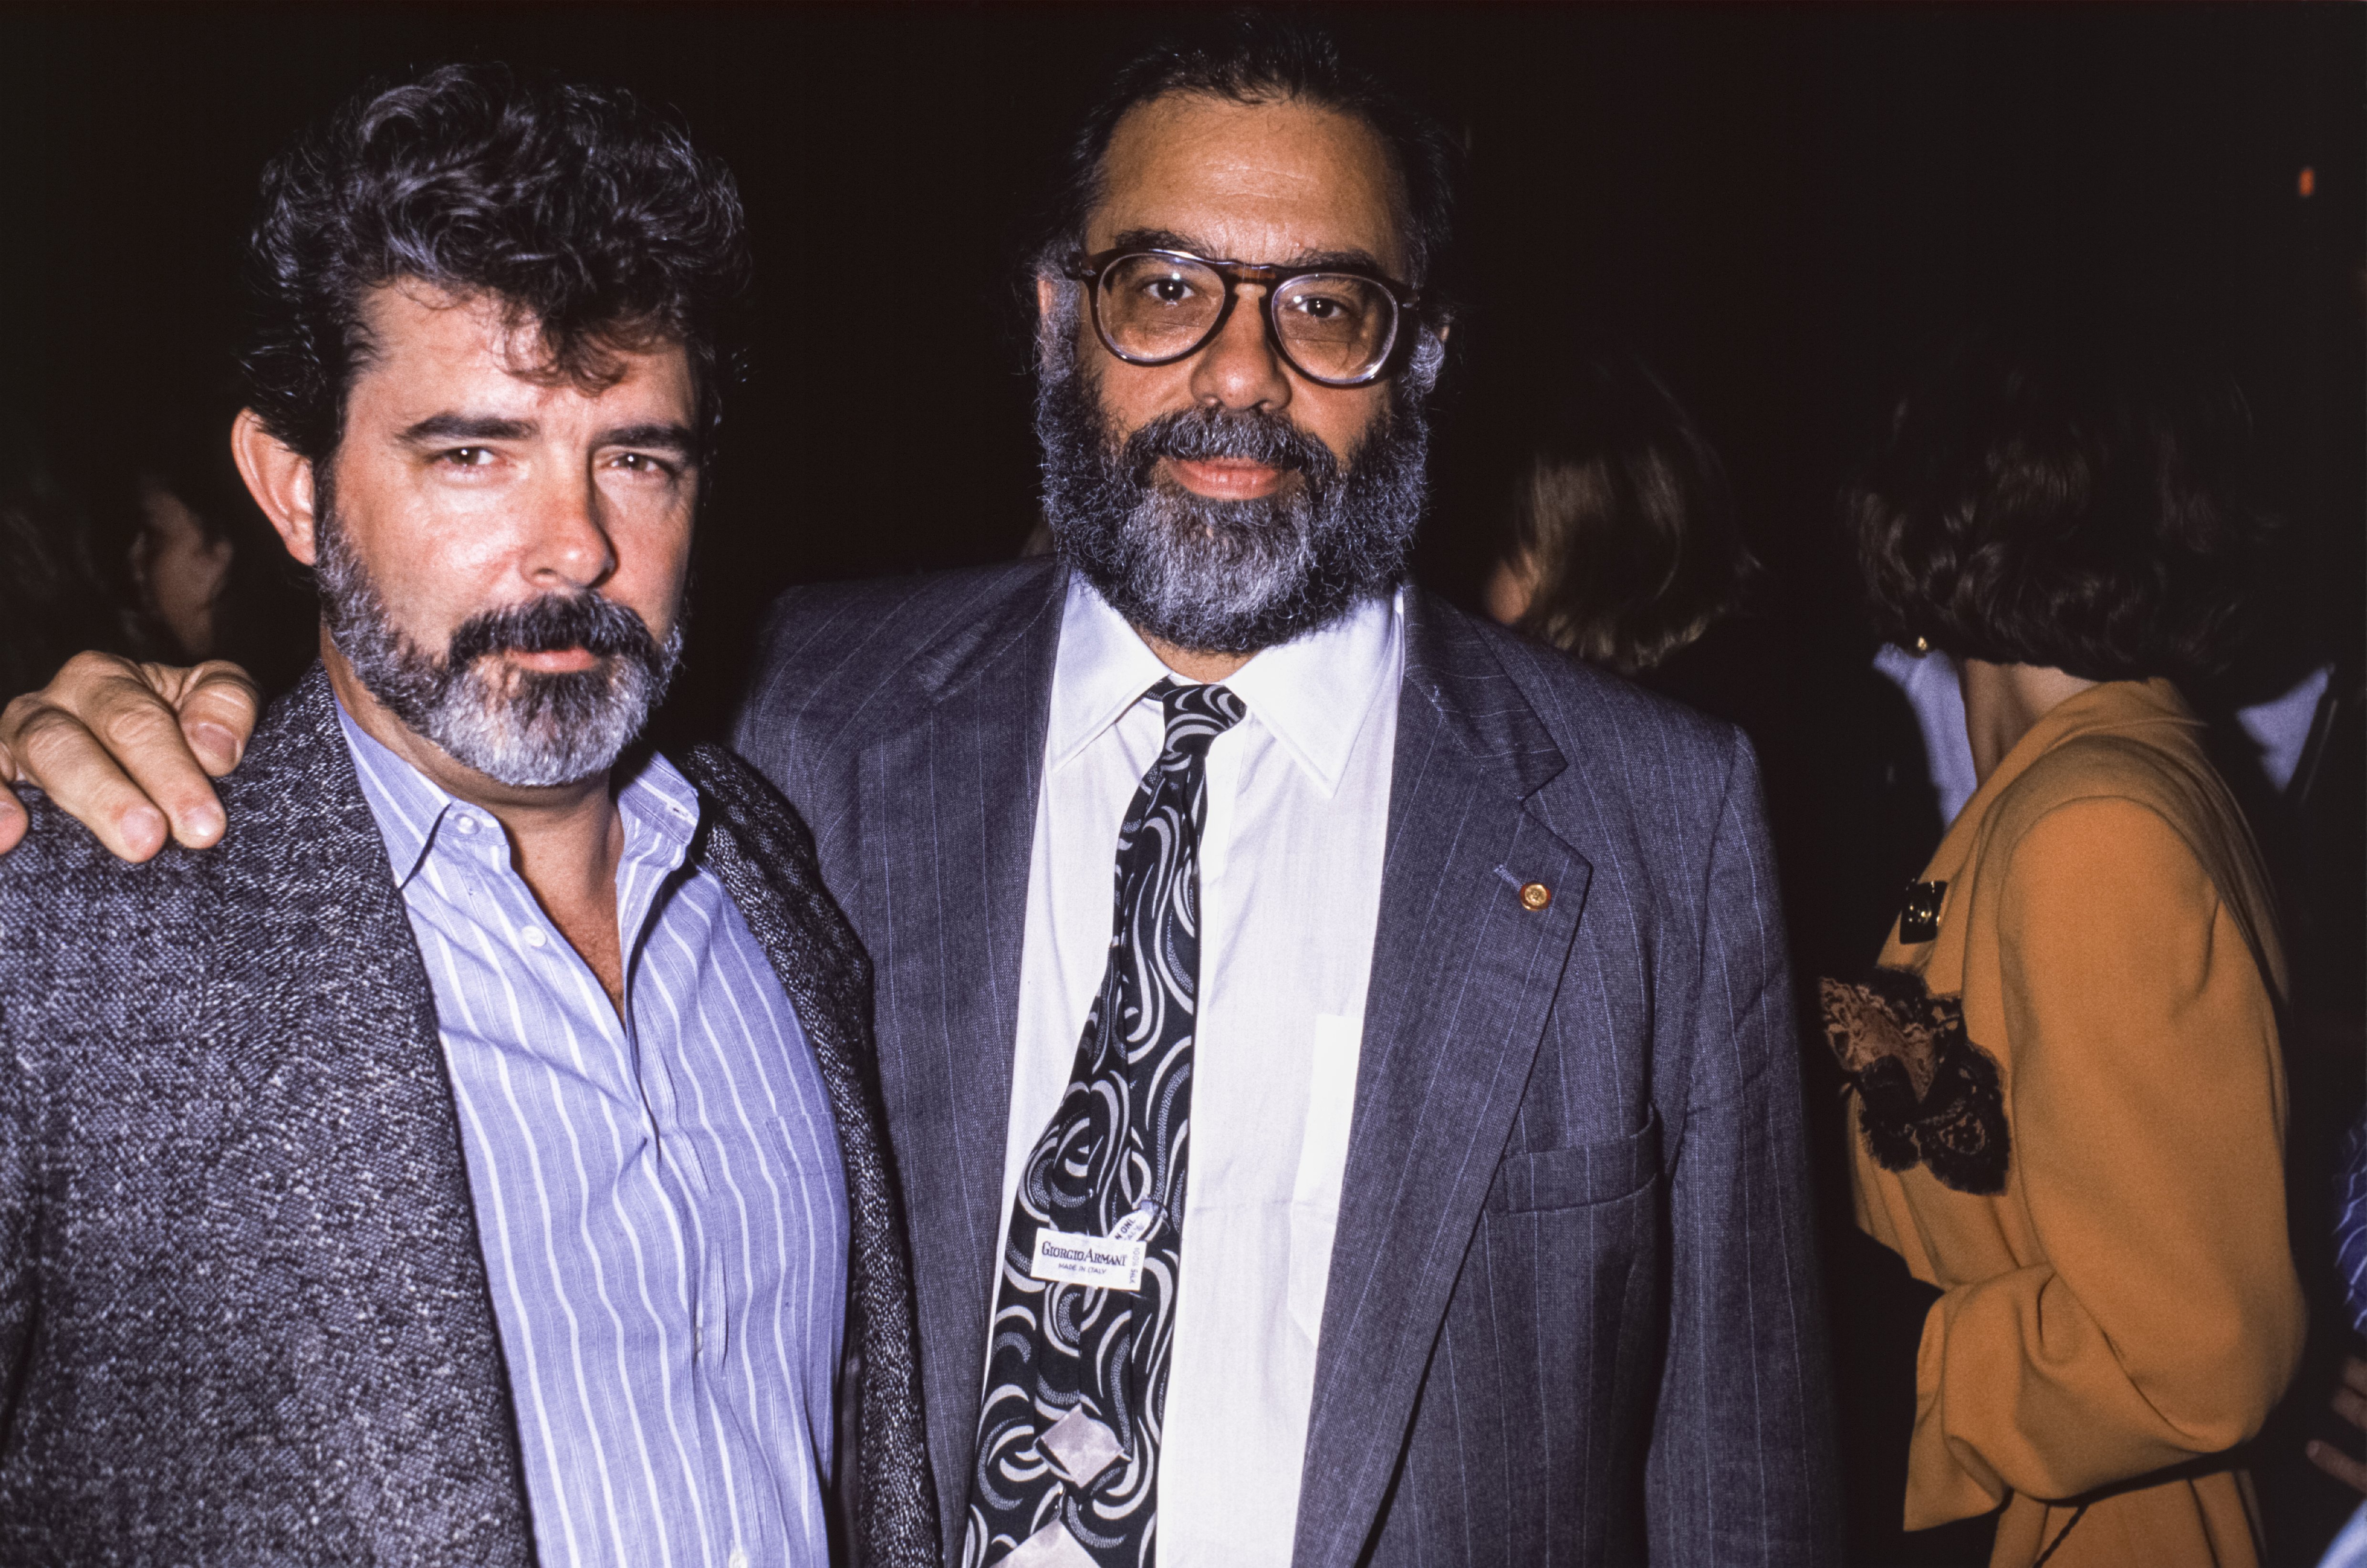 George Lucas and Francis Ford Coppola in Paris in October 1988 | Source: Getty Images